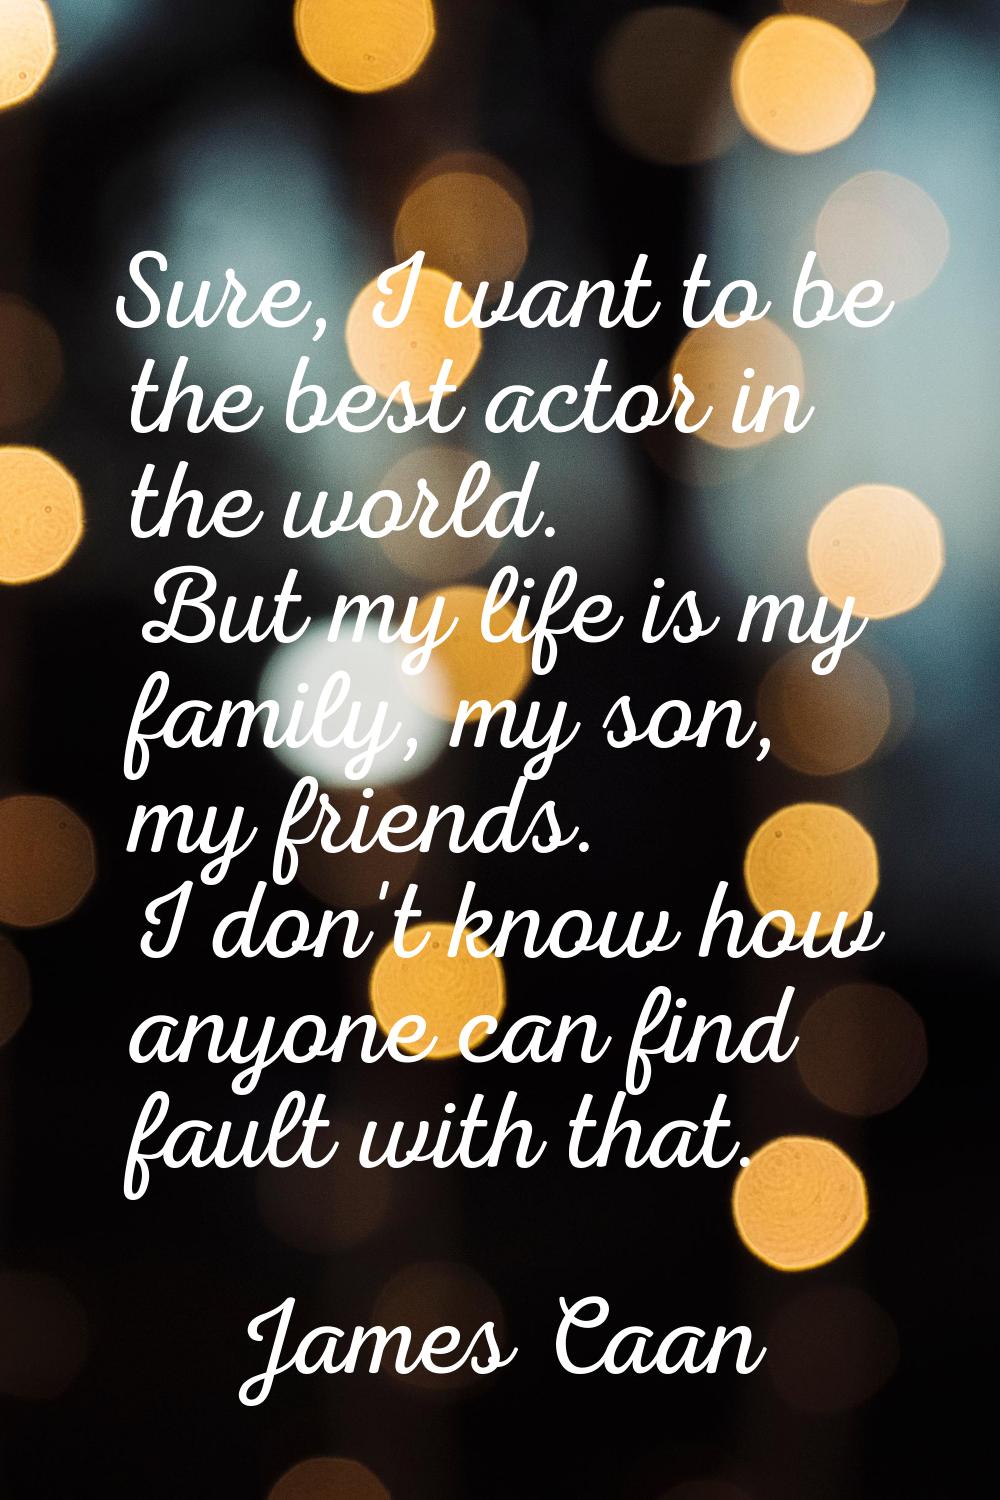 Sure, I want to be the best actor in the world. But my life is my family, my son, my friends. I don